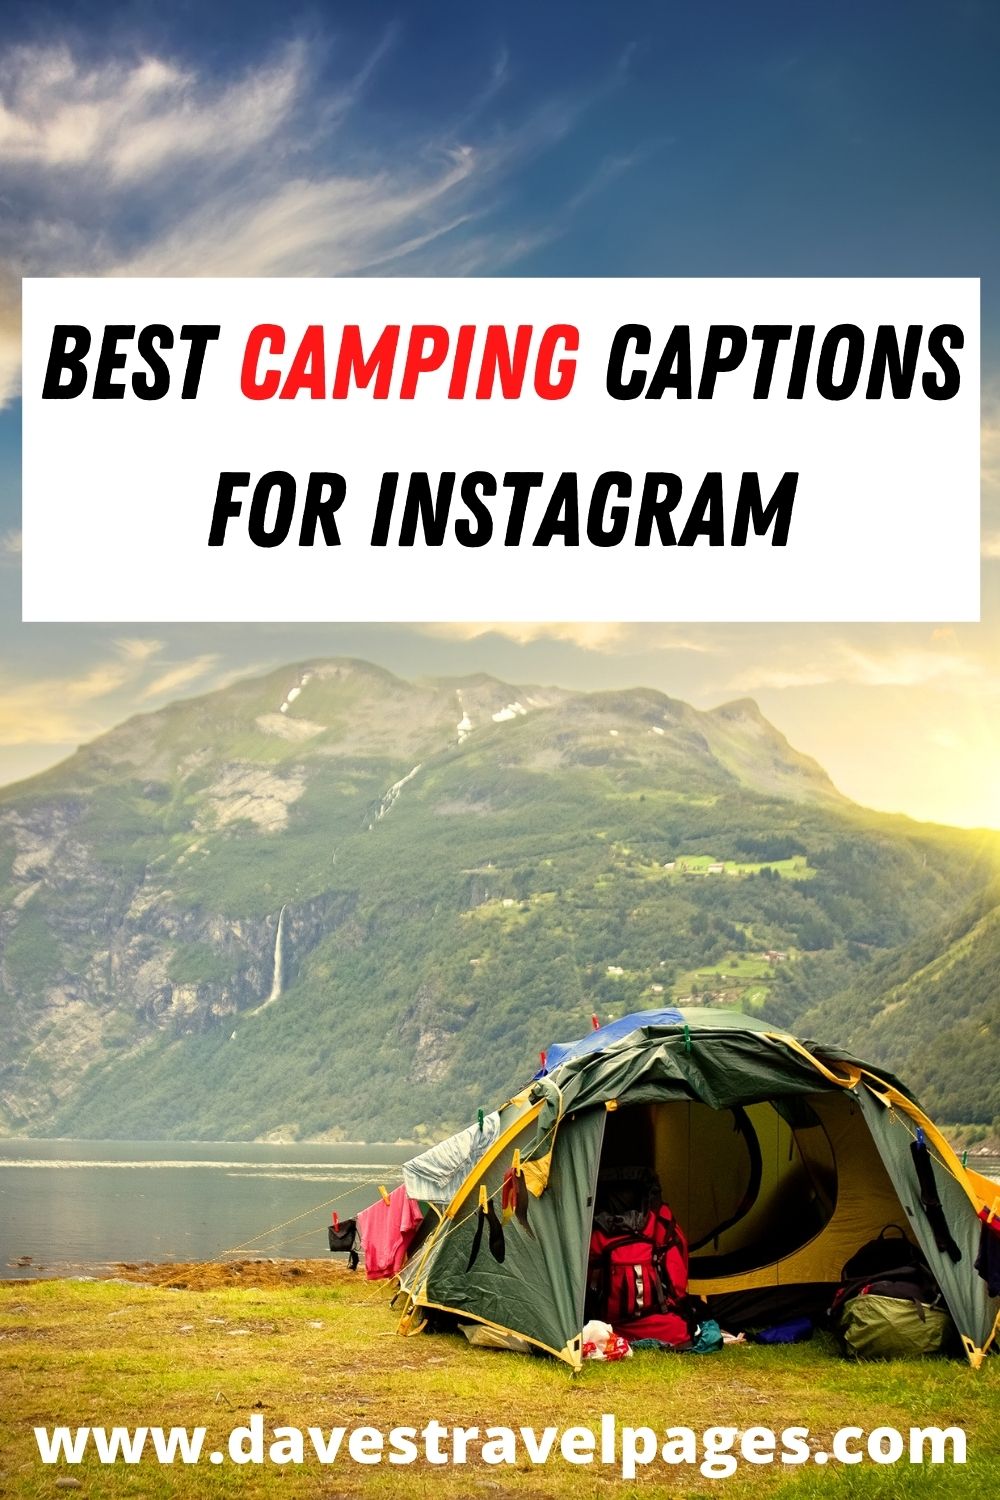 Best Camping Captions For Instagram and Facebook